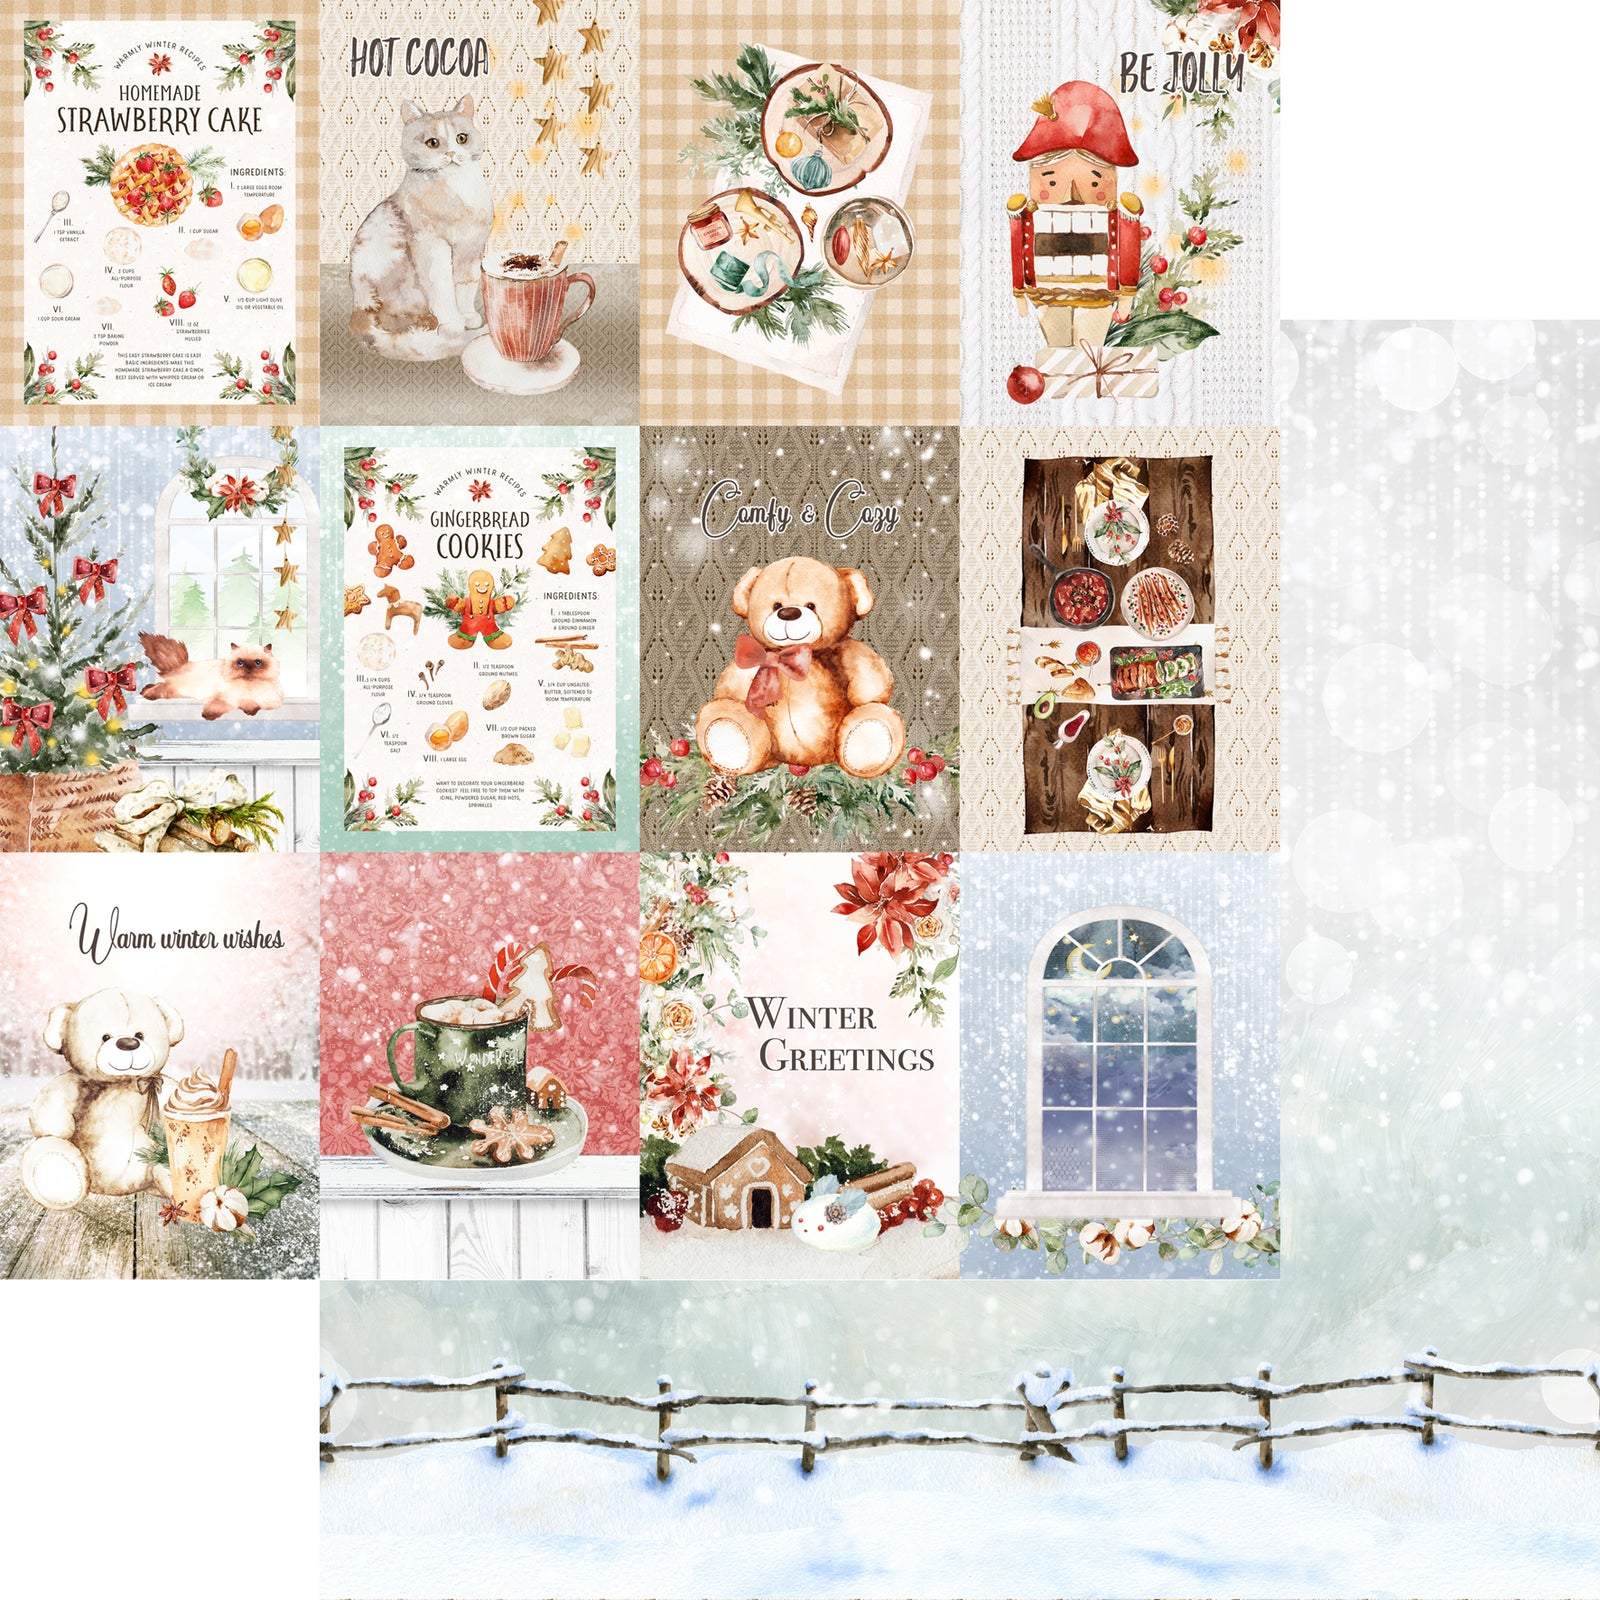 12x12 Paper Collection Pack - Home for the Holidays - Memory Place - Asuka Studio